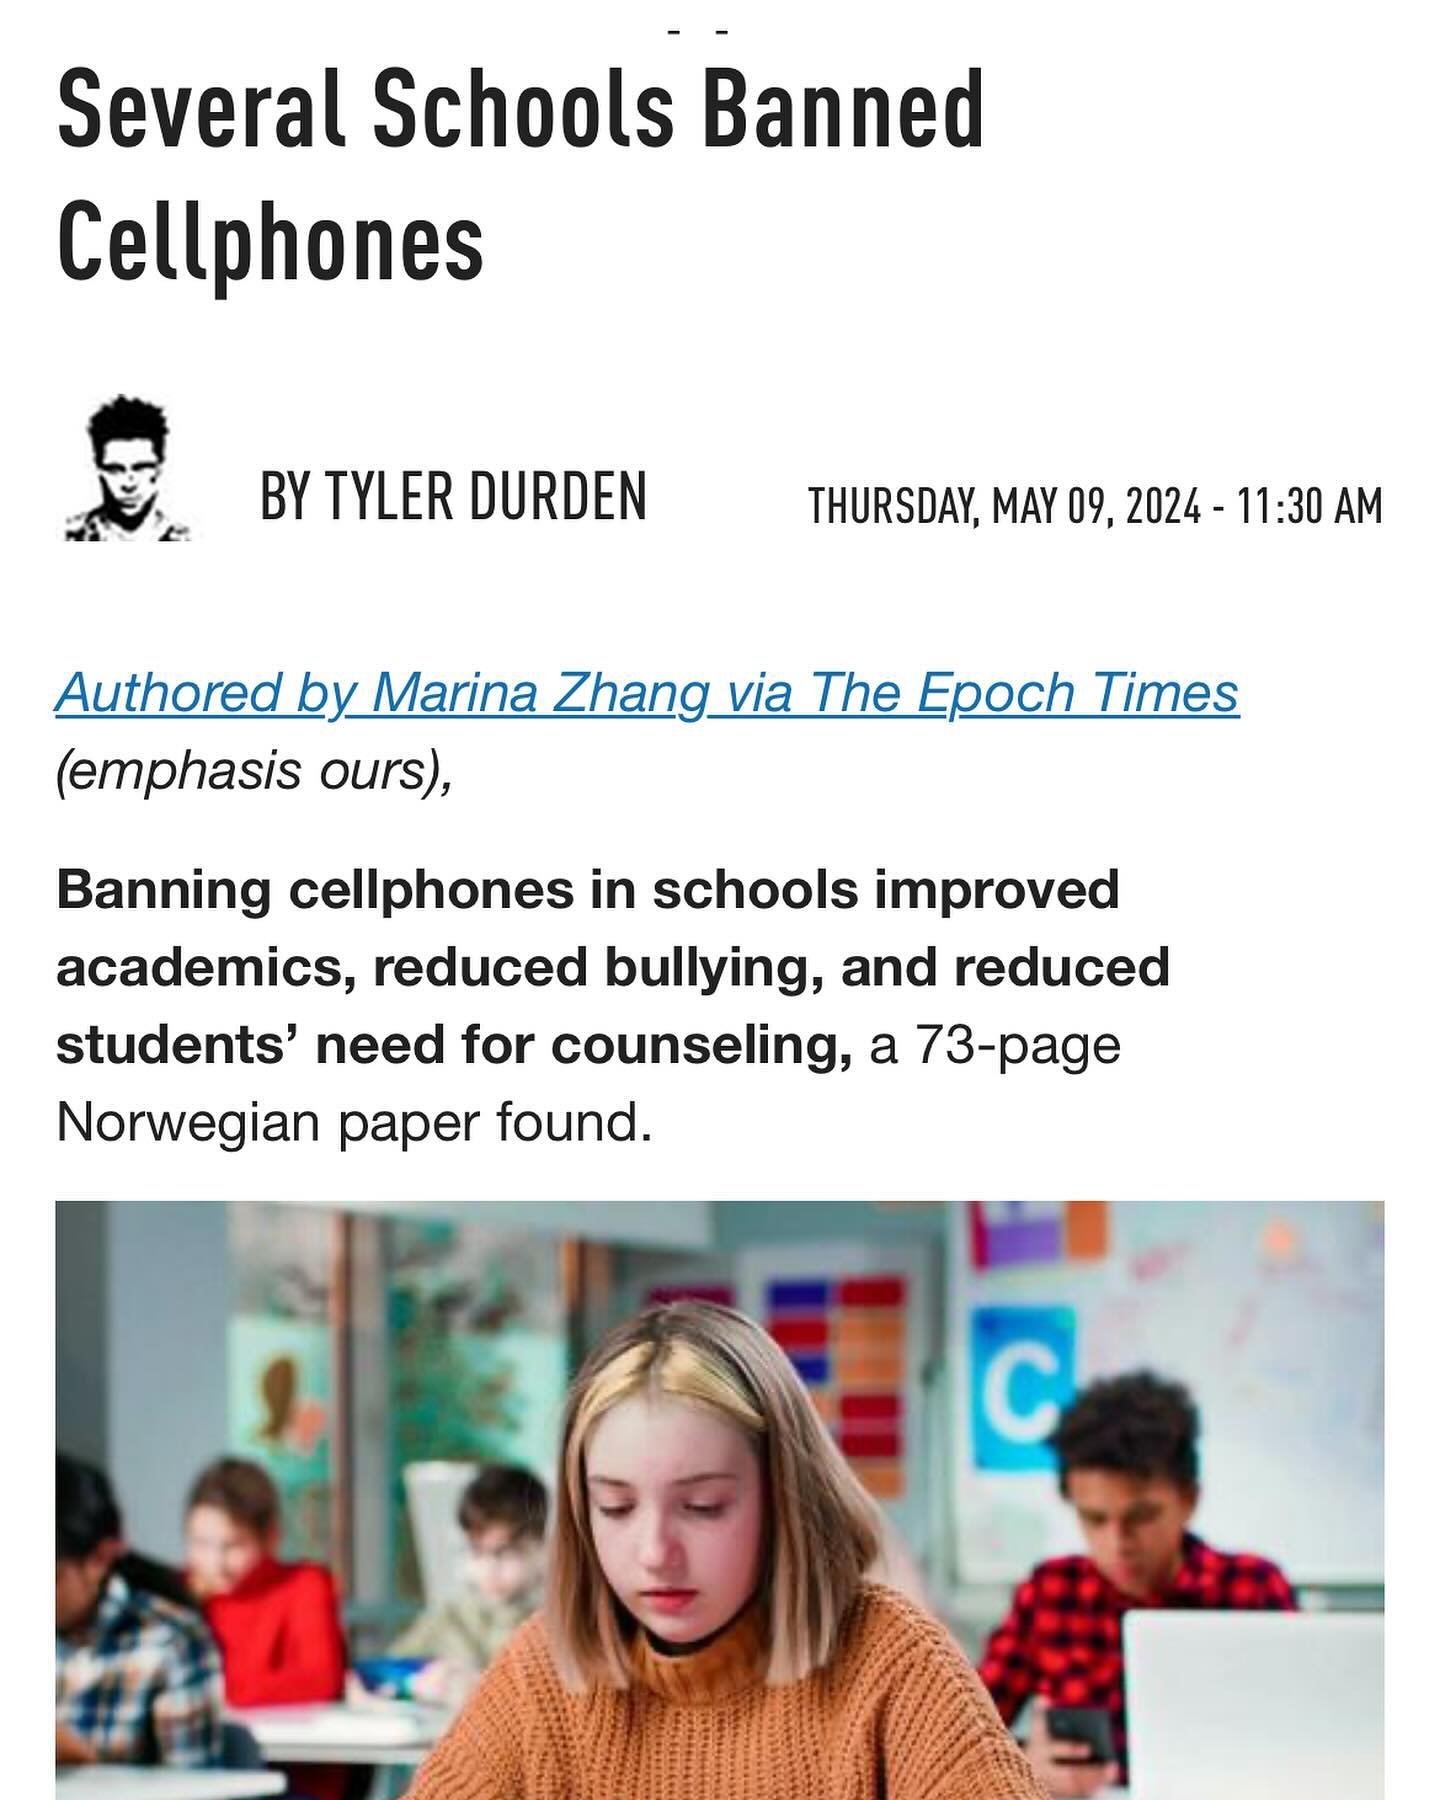 📱 Does banning phones in schools help students? A new Norwegian study has the answer! 📱 

https://www.zerohedge.com/medical/what-happened-after-several-schools-banned-cellphones

#cellphoneban #learning #education #parenting #parenthood #parents #p